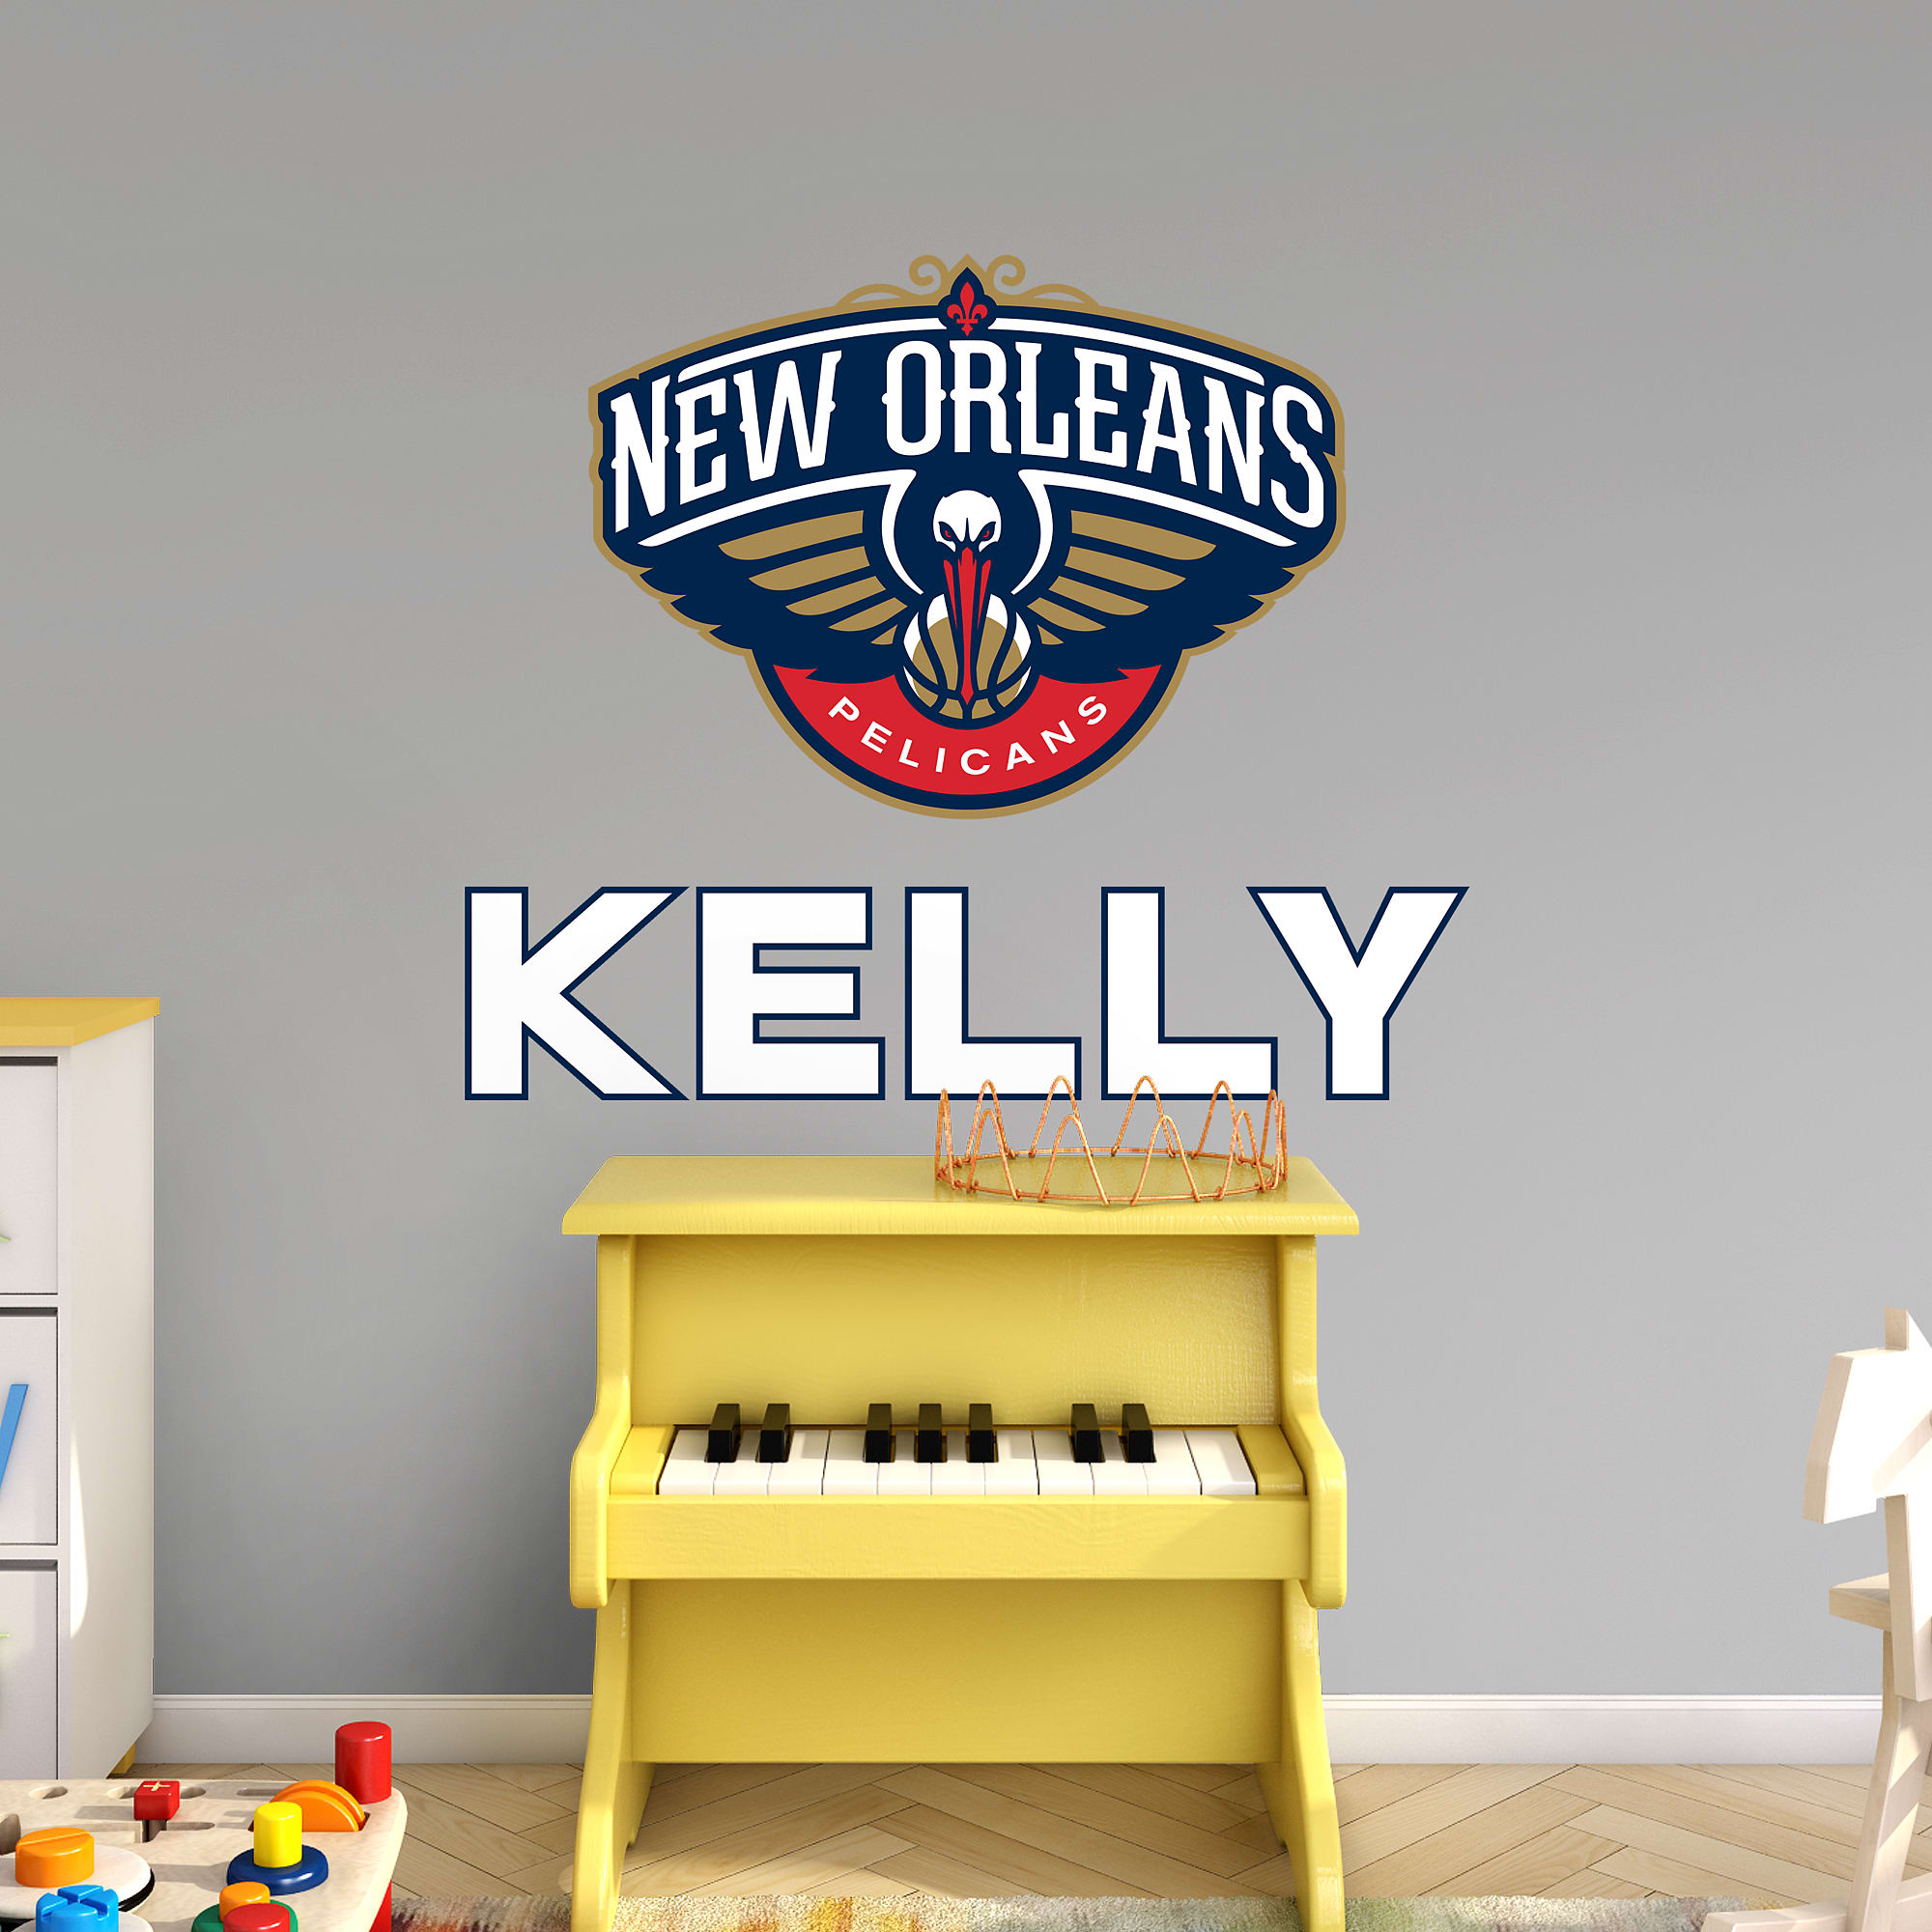 New Orleans Pelicans: Stacked Personalized Name - Officially Licensed NBA Transfer Decal in White (52"W x 39.5"H) by Fathead | V